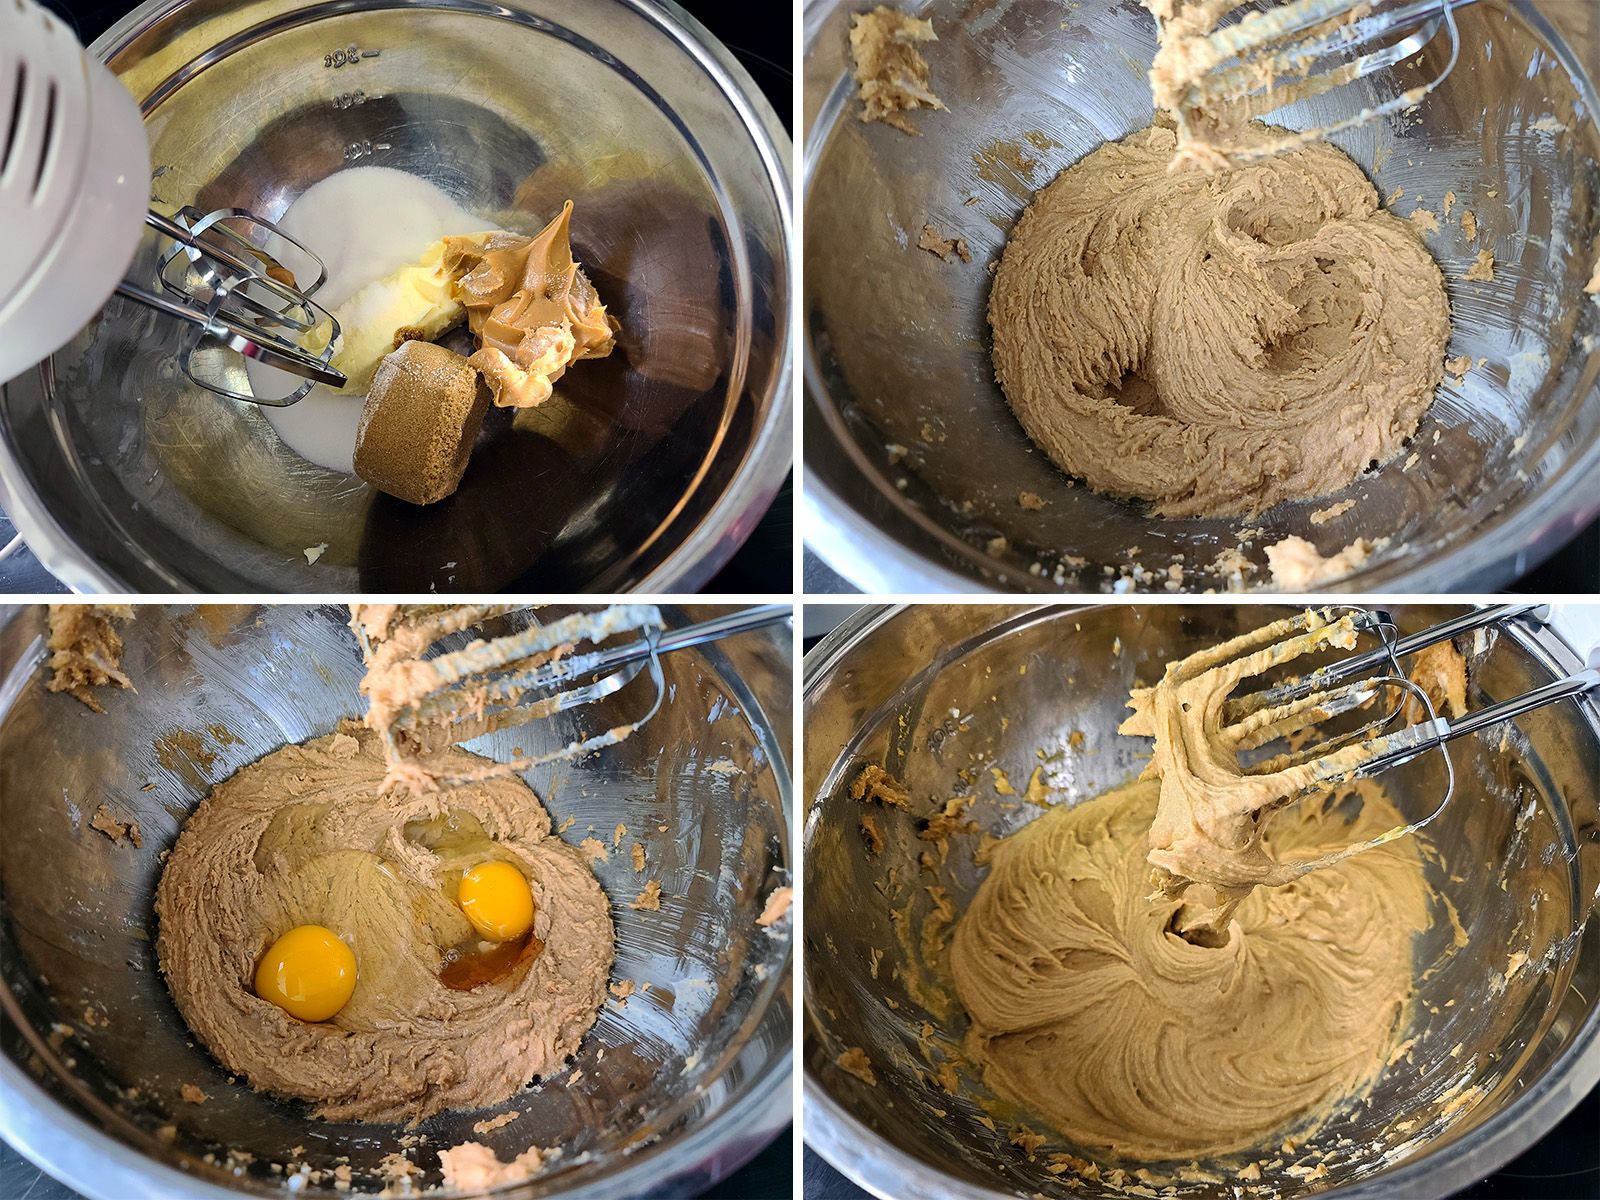 A 4 part image showing the wet ingredients being creamed and mixed.